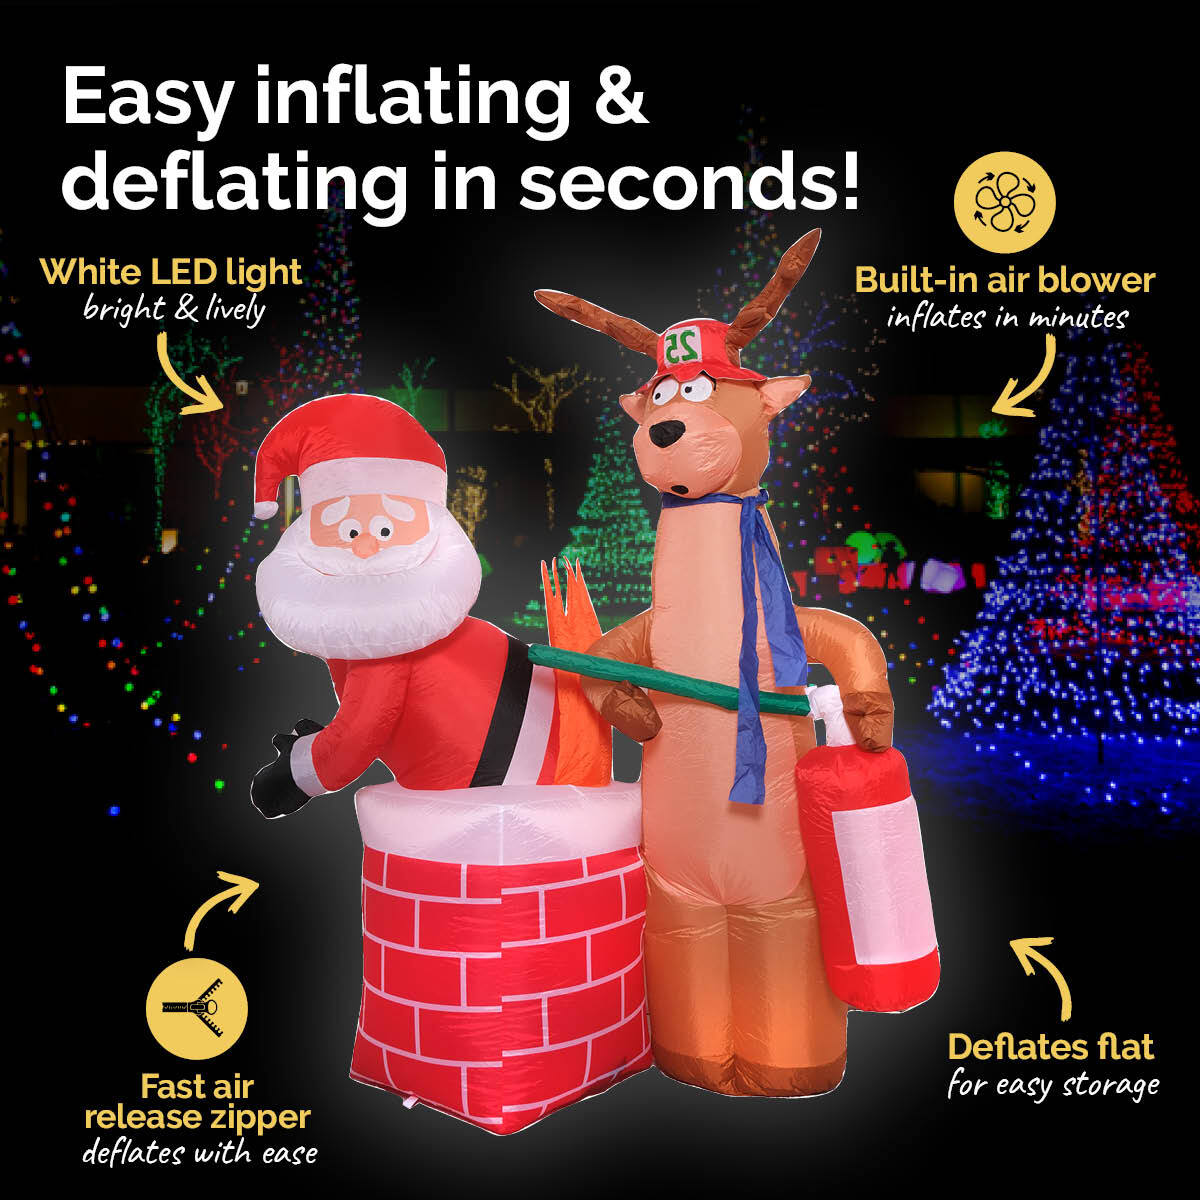 Easy inflating and deflating in seconds